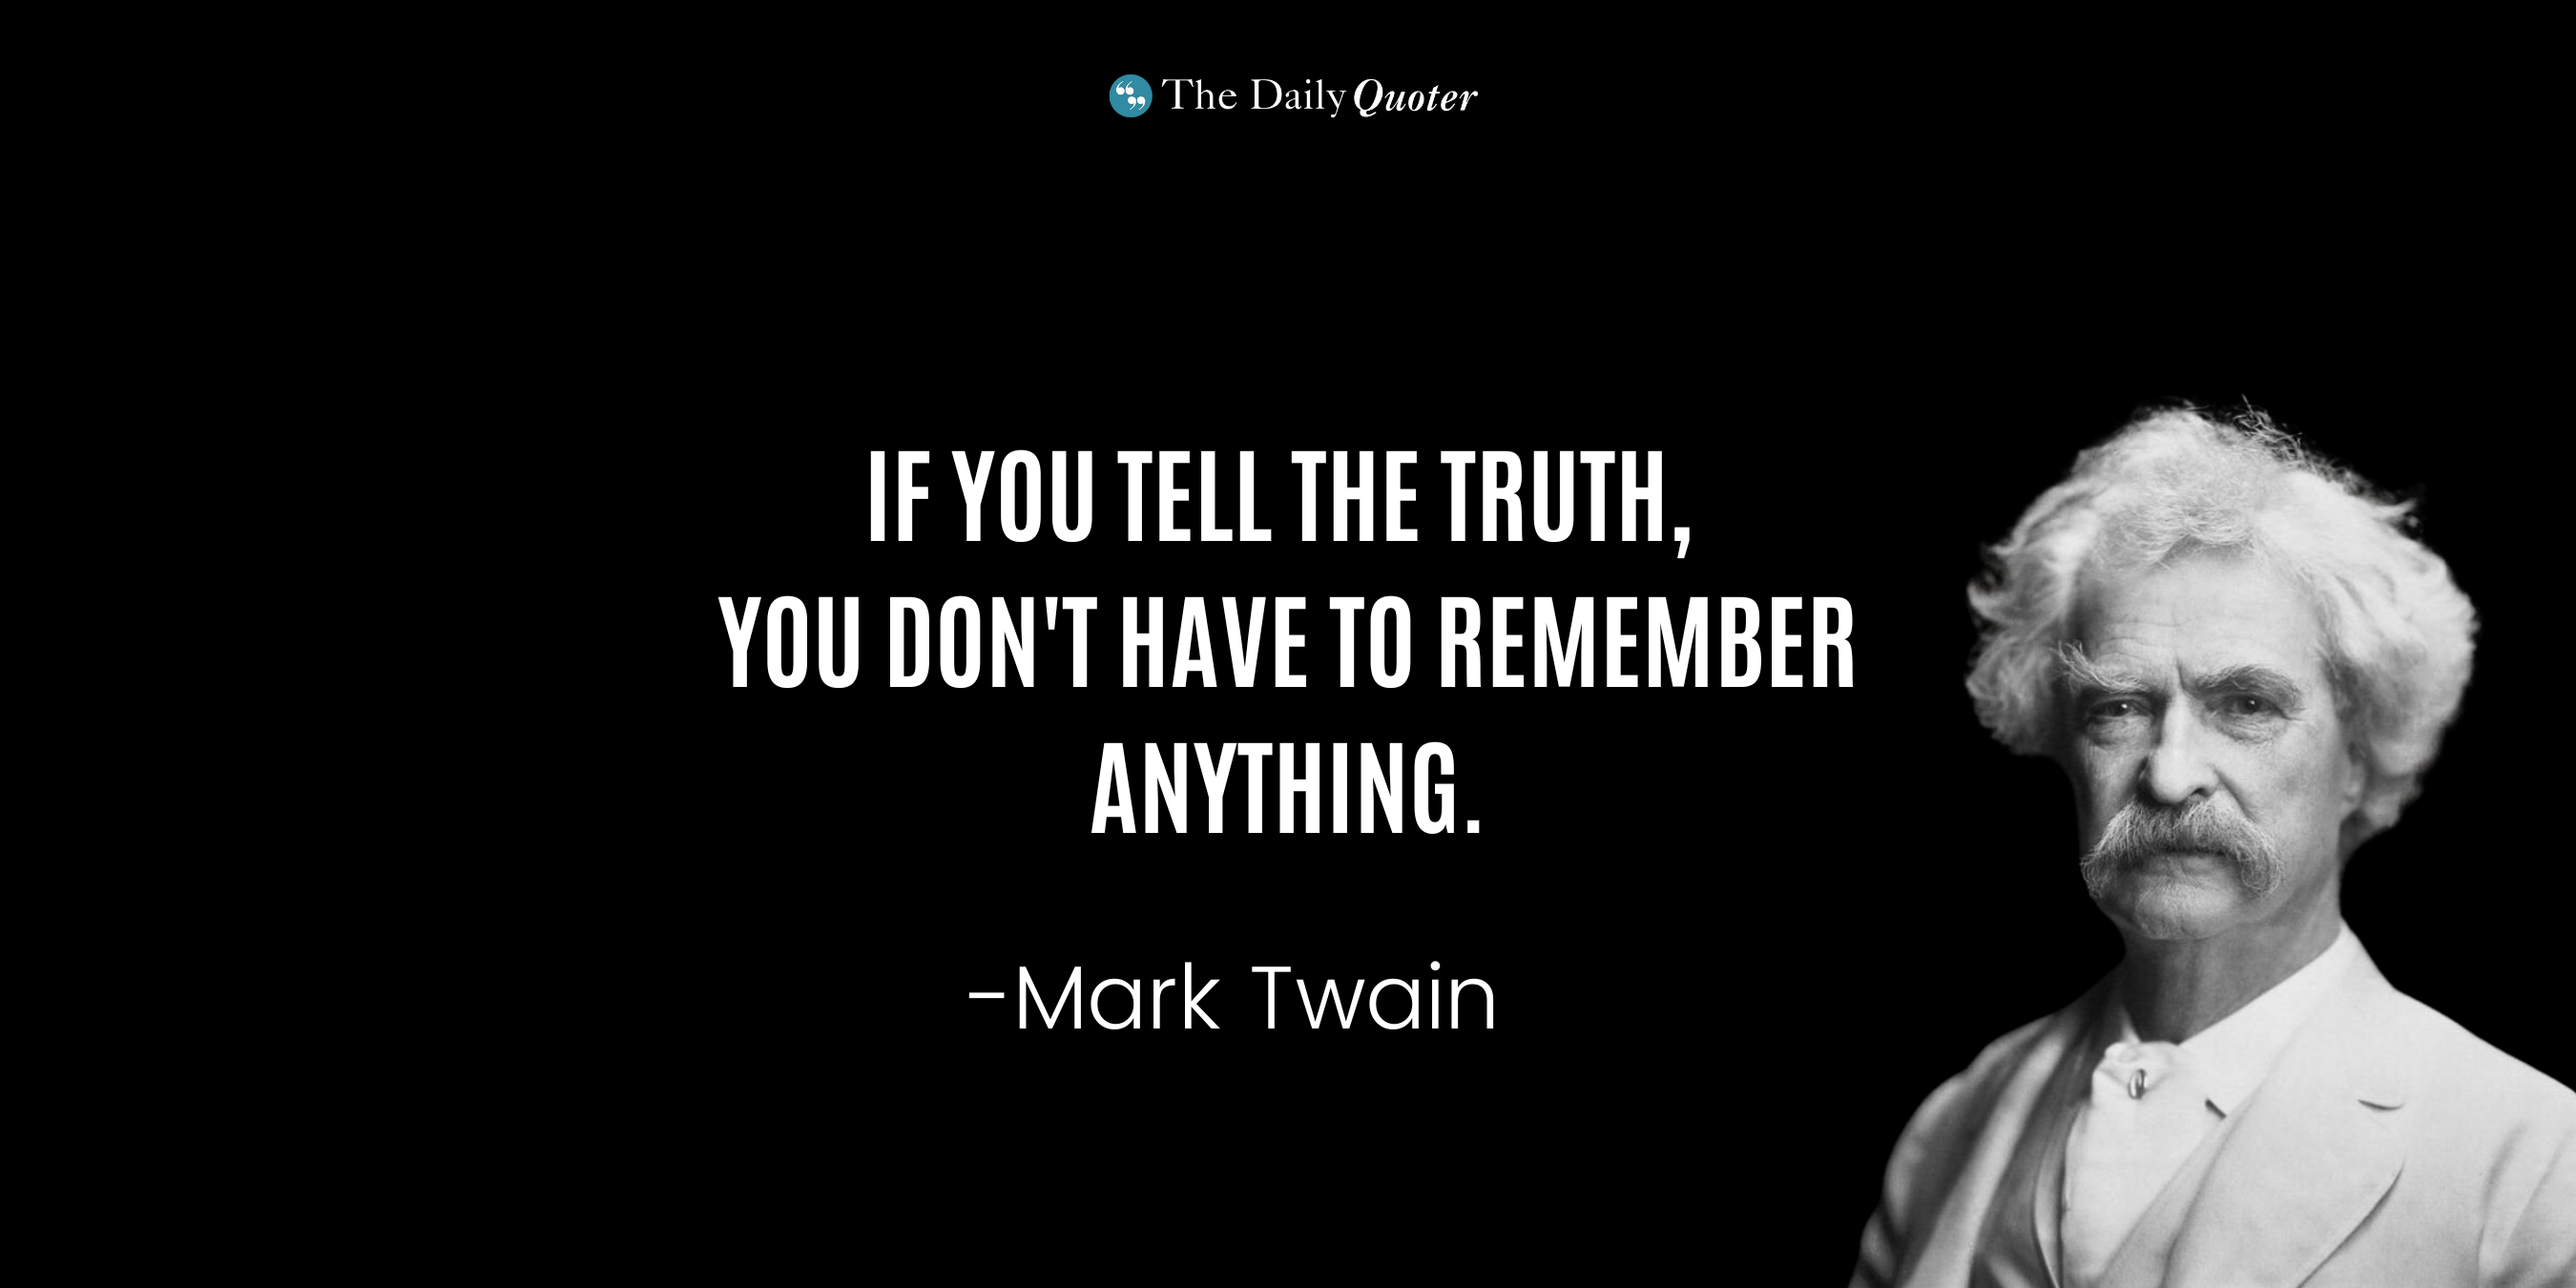 "If you tell the truth, you don't have to remember anything." – Mark Twain